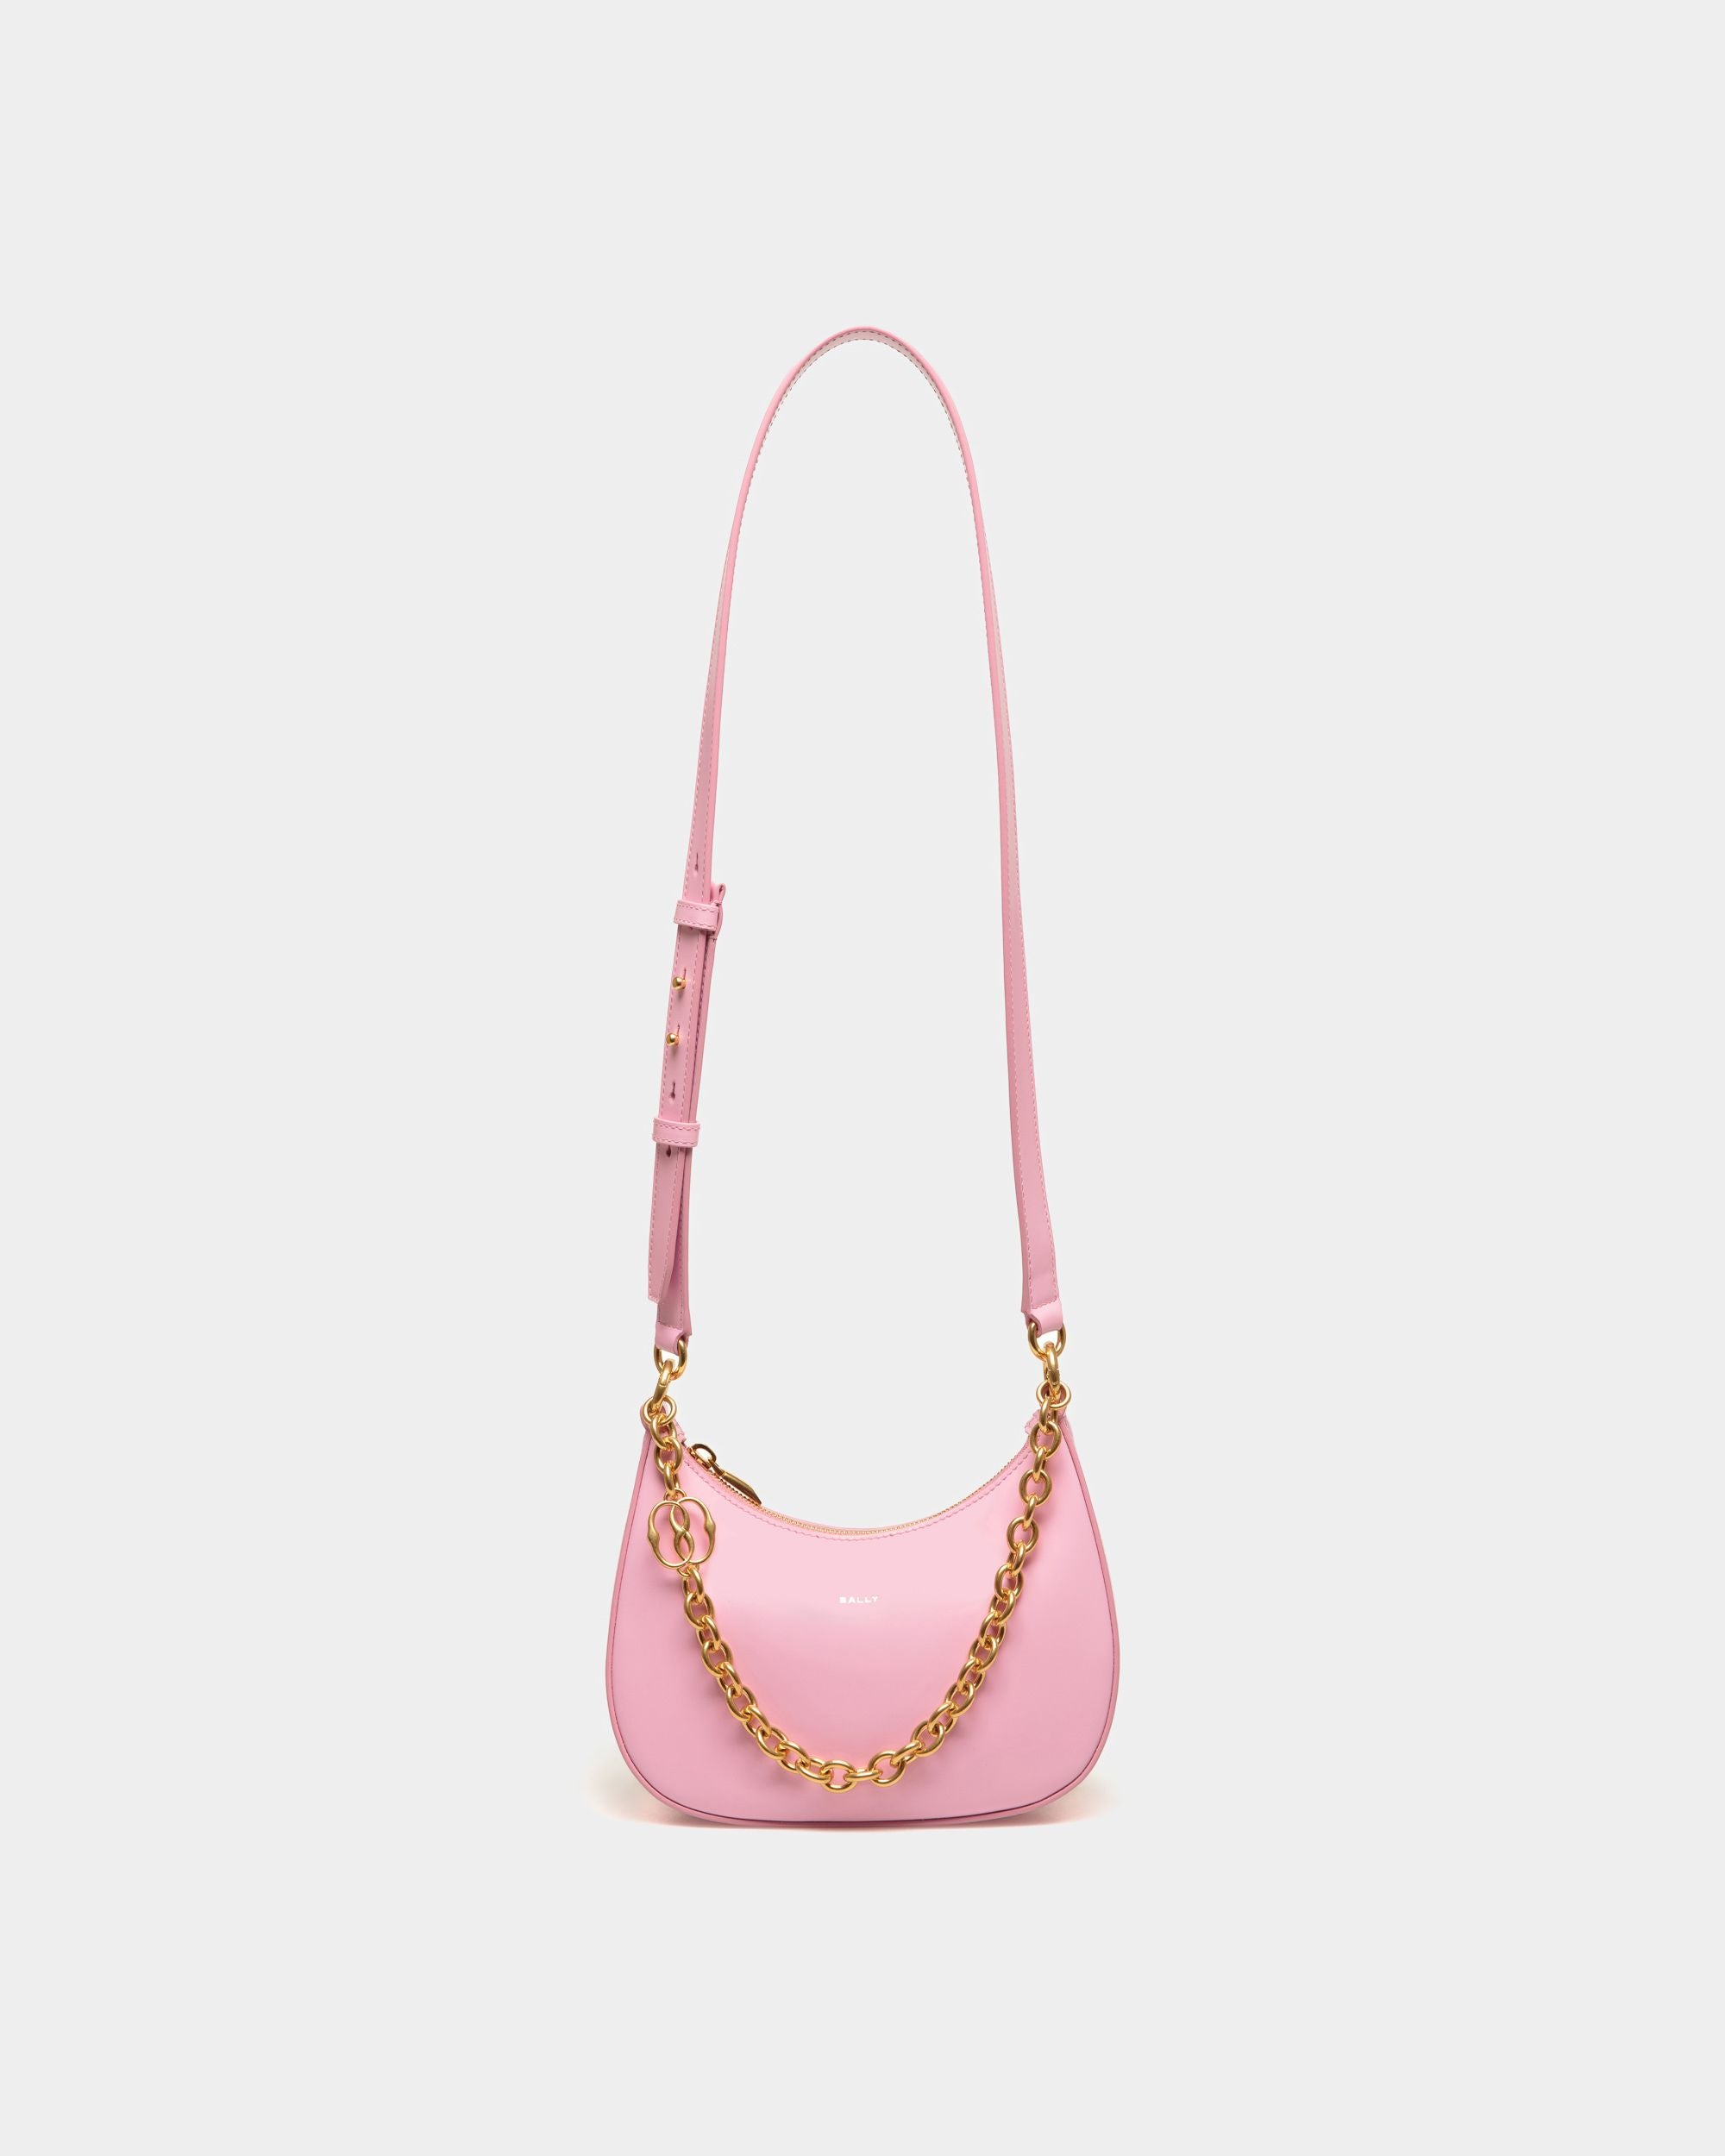 Women's Emblem Mini Crossbody Bag in Pink Patent Leather | Bally | Still Life Front